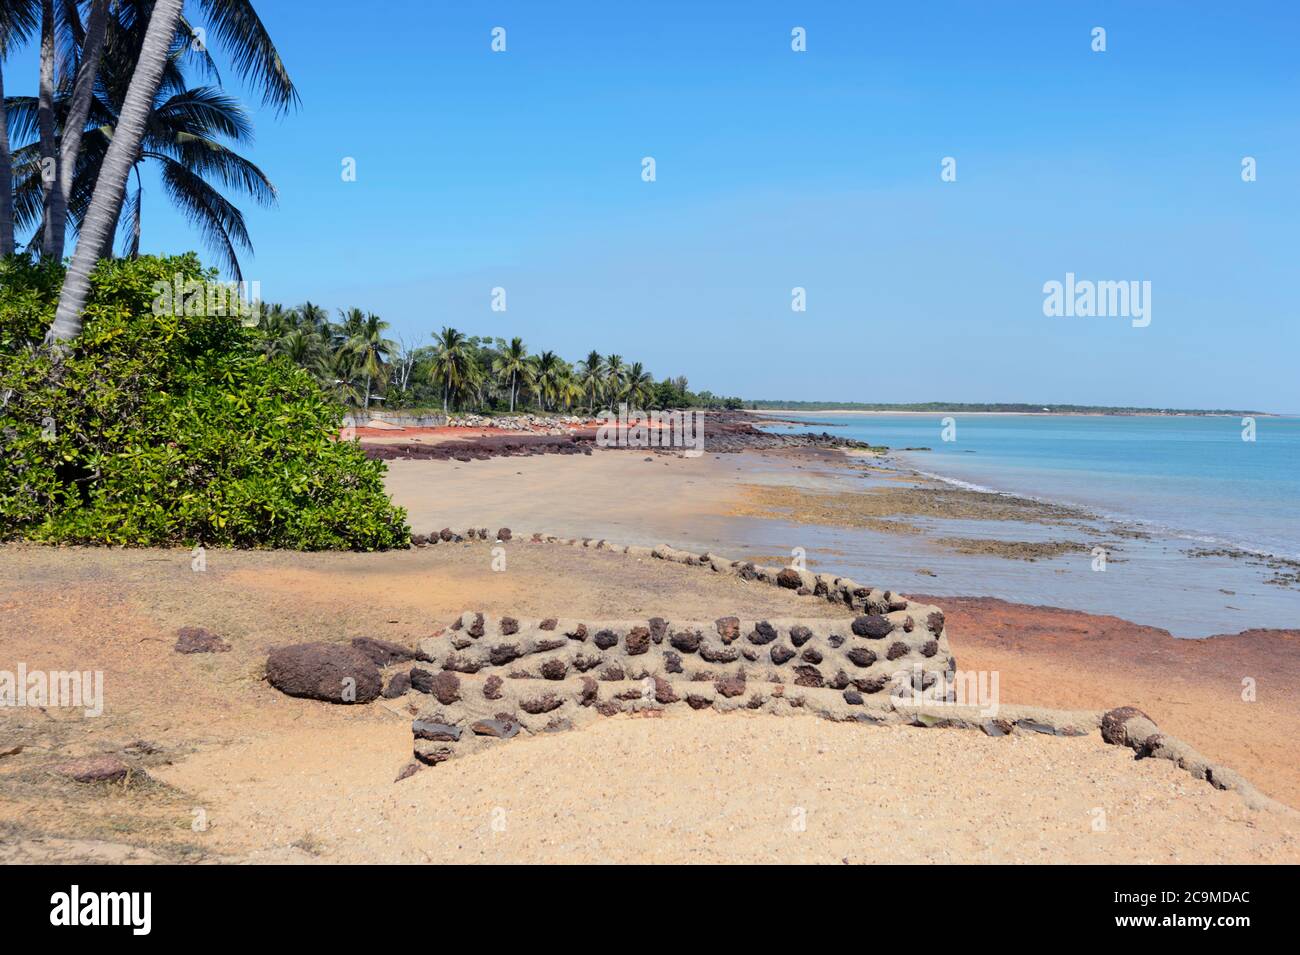 View of scenic popular Dundee Beach fringed with palm trees near Darwin, Northern Territory, NT, Australia Stock Photo